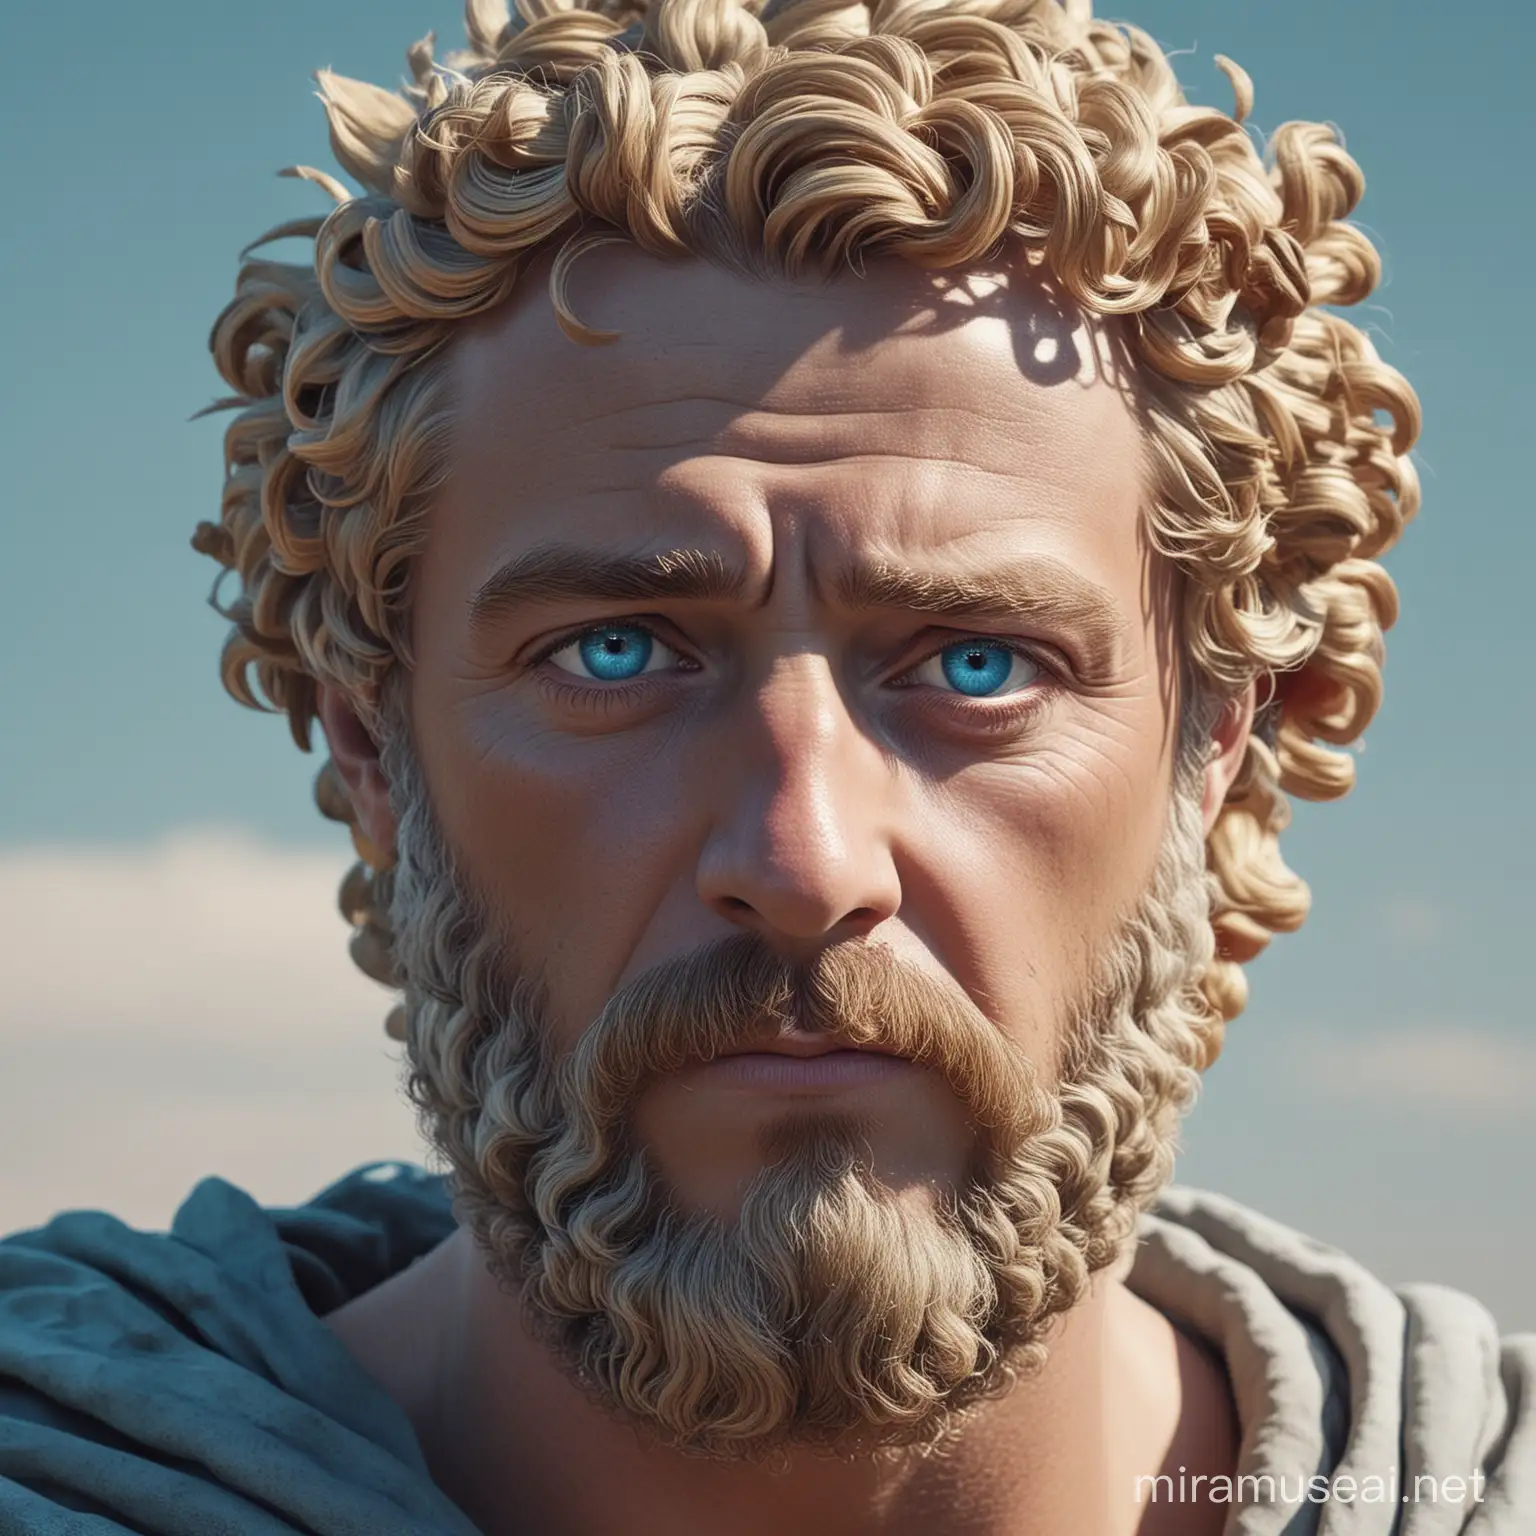 Marcus aurelius in 4k showing him as a strong and powerful stoic with blue eyes and blond hair, please apply a color gradient filiter starting with blue / purpule to pinkish red. it needs to be a profile picture zoom out and please keep the head centered in the picture, make him look philosophical and make him look like he is wondering about how to solve problems. make him handsome and strong looking